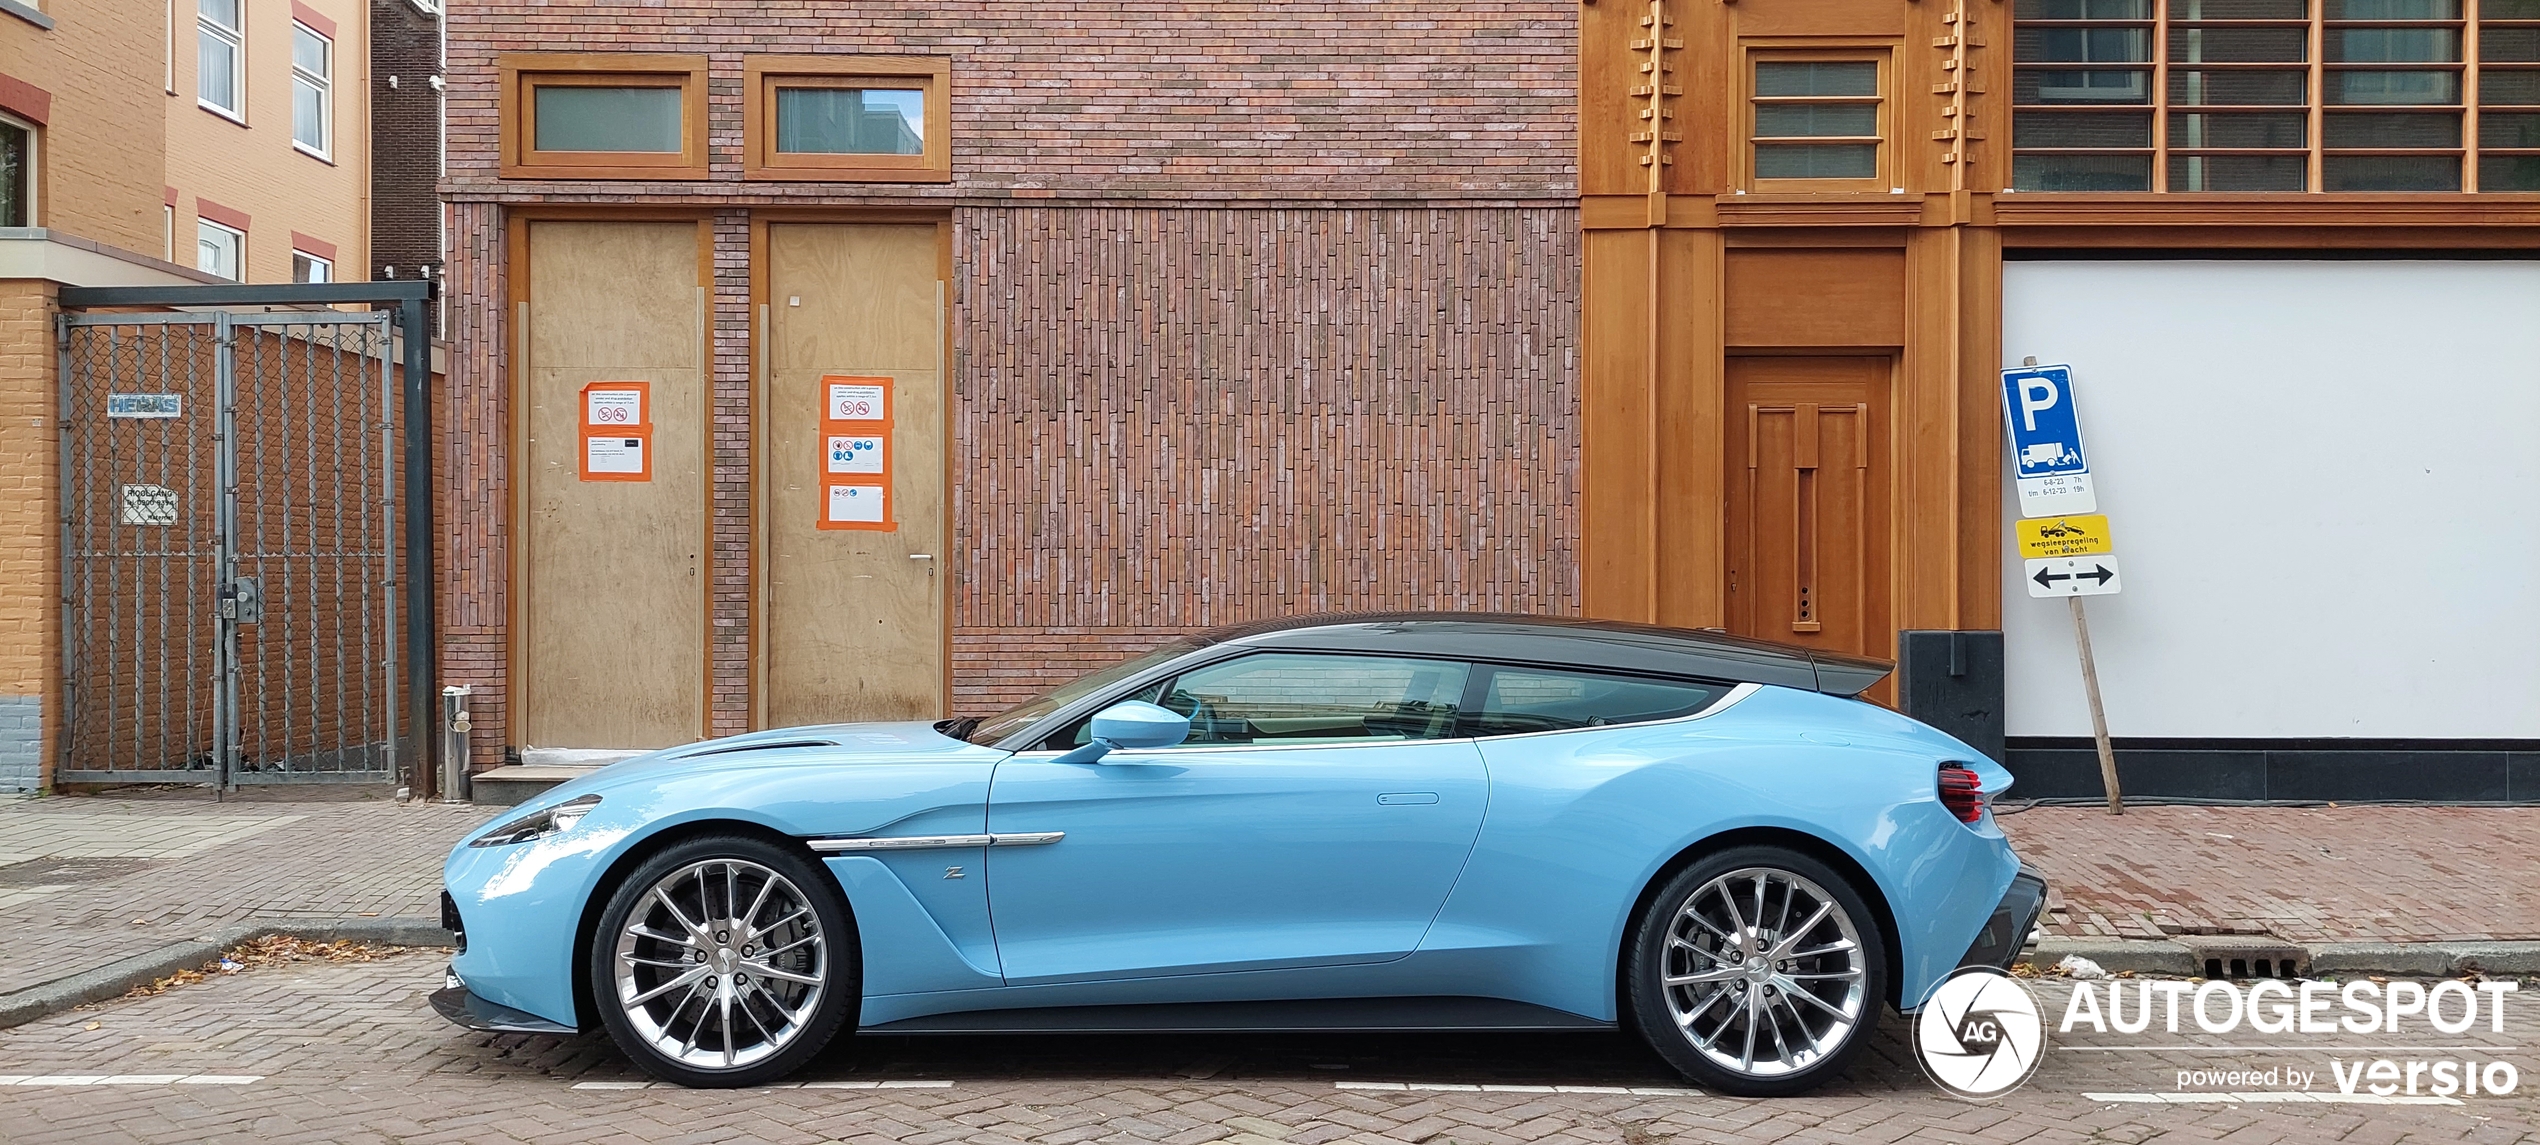 The most beautiful Vanquish Zagato Shooting Brake is now on the road with Dutch license plates.